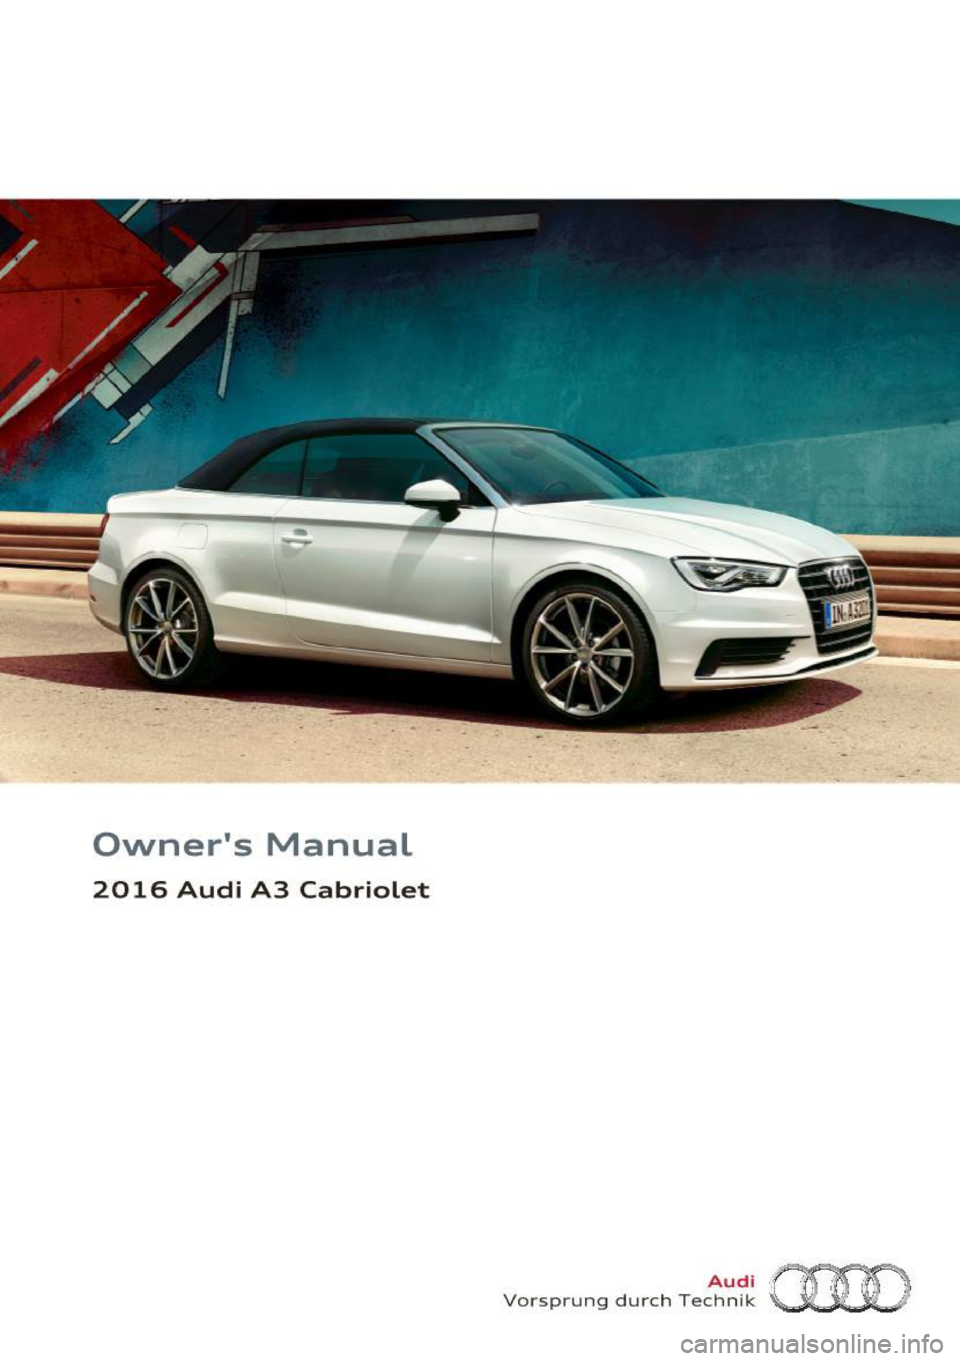 AUDI A3 CABRIOLET 2016  Owners Manual Owners  Manual 
2016  Audi  A3  Cabriolet 
Vorsprung  durch Te~~?~ (HO  